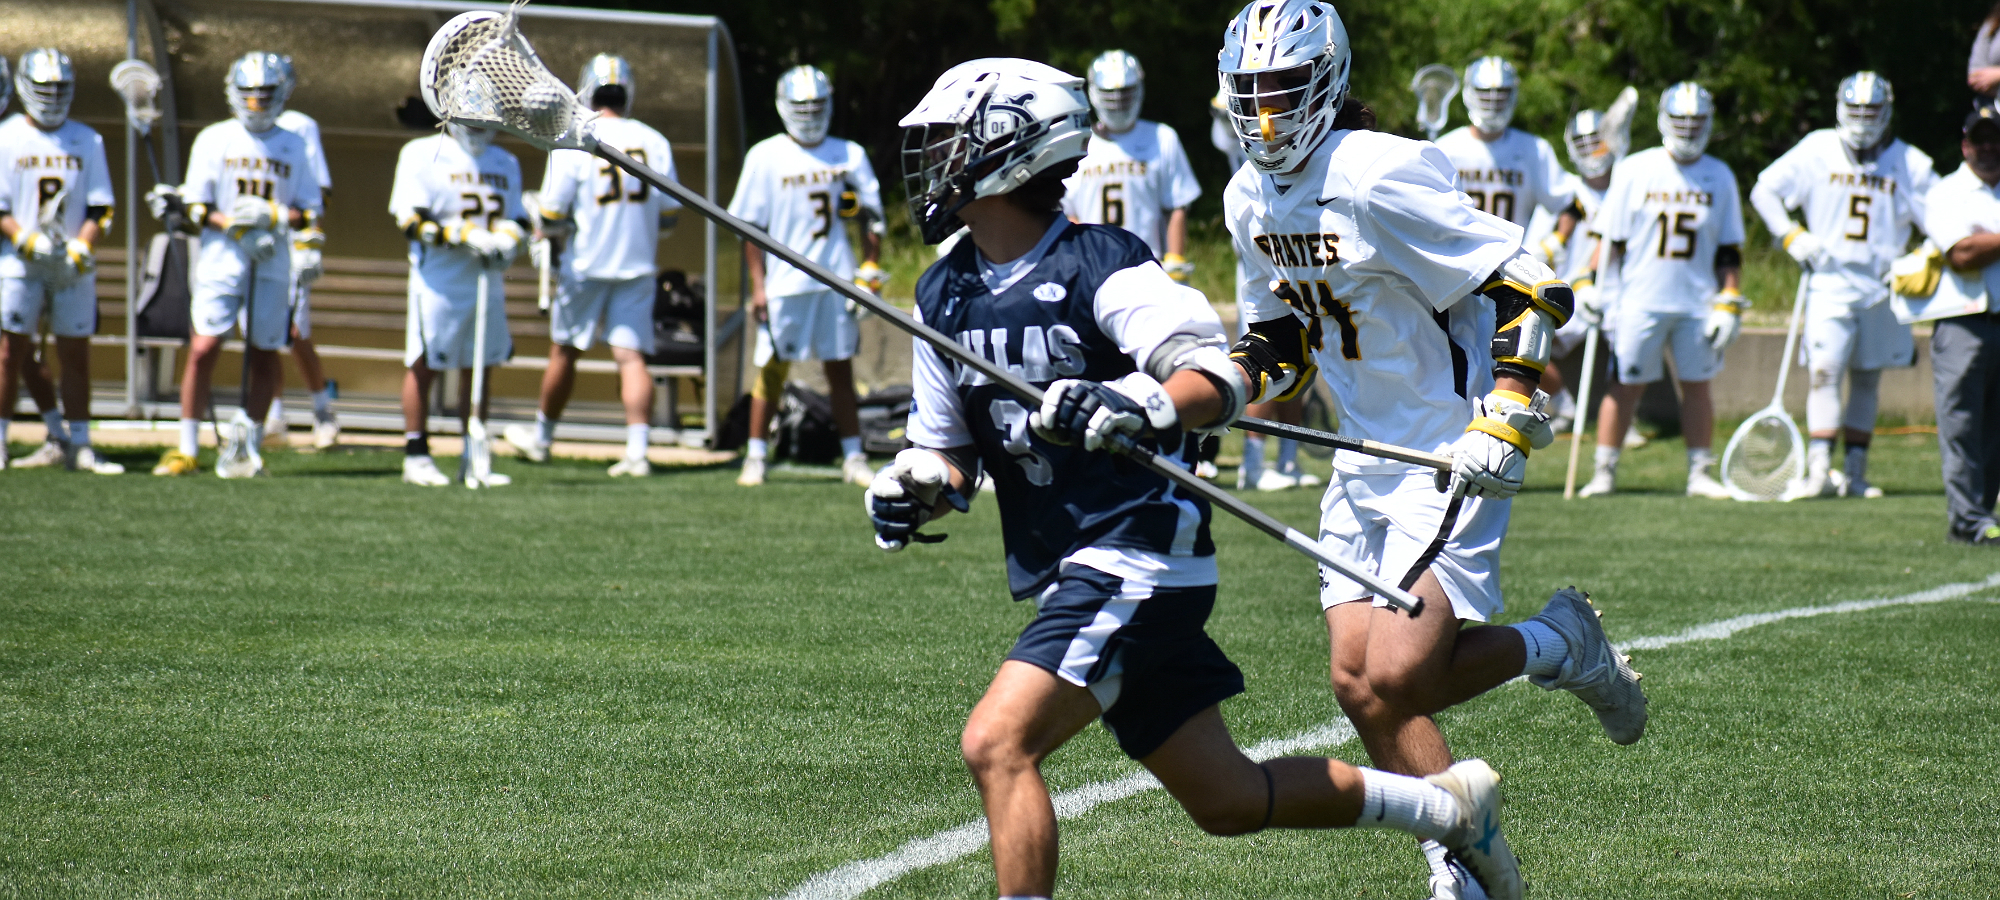 Crusaders fall in SCAC Men's Lacrosse Opening Round on Friday